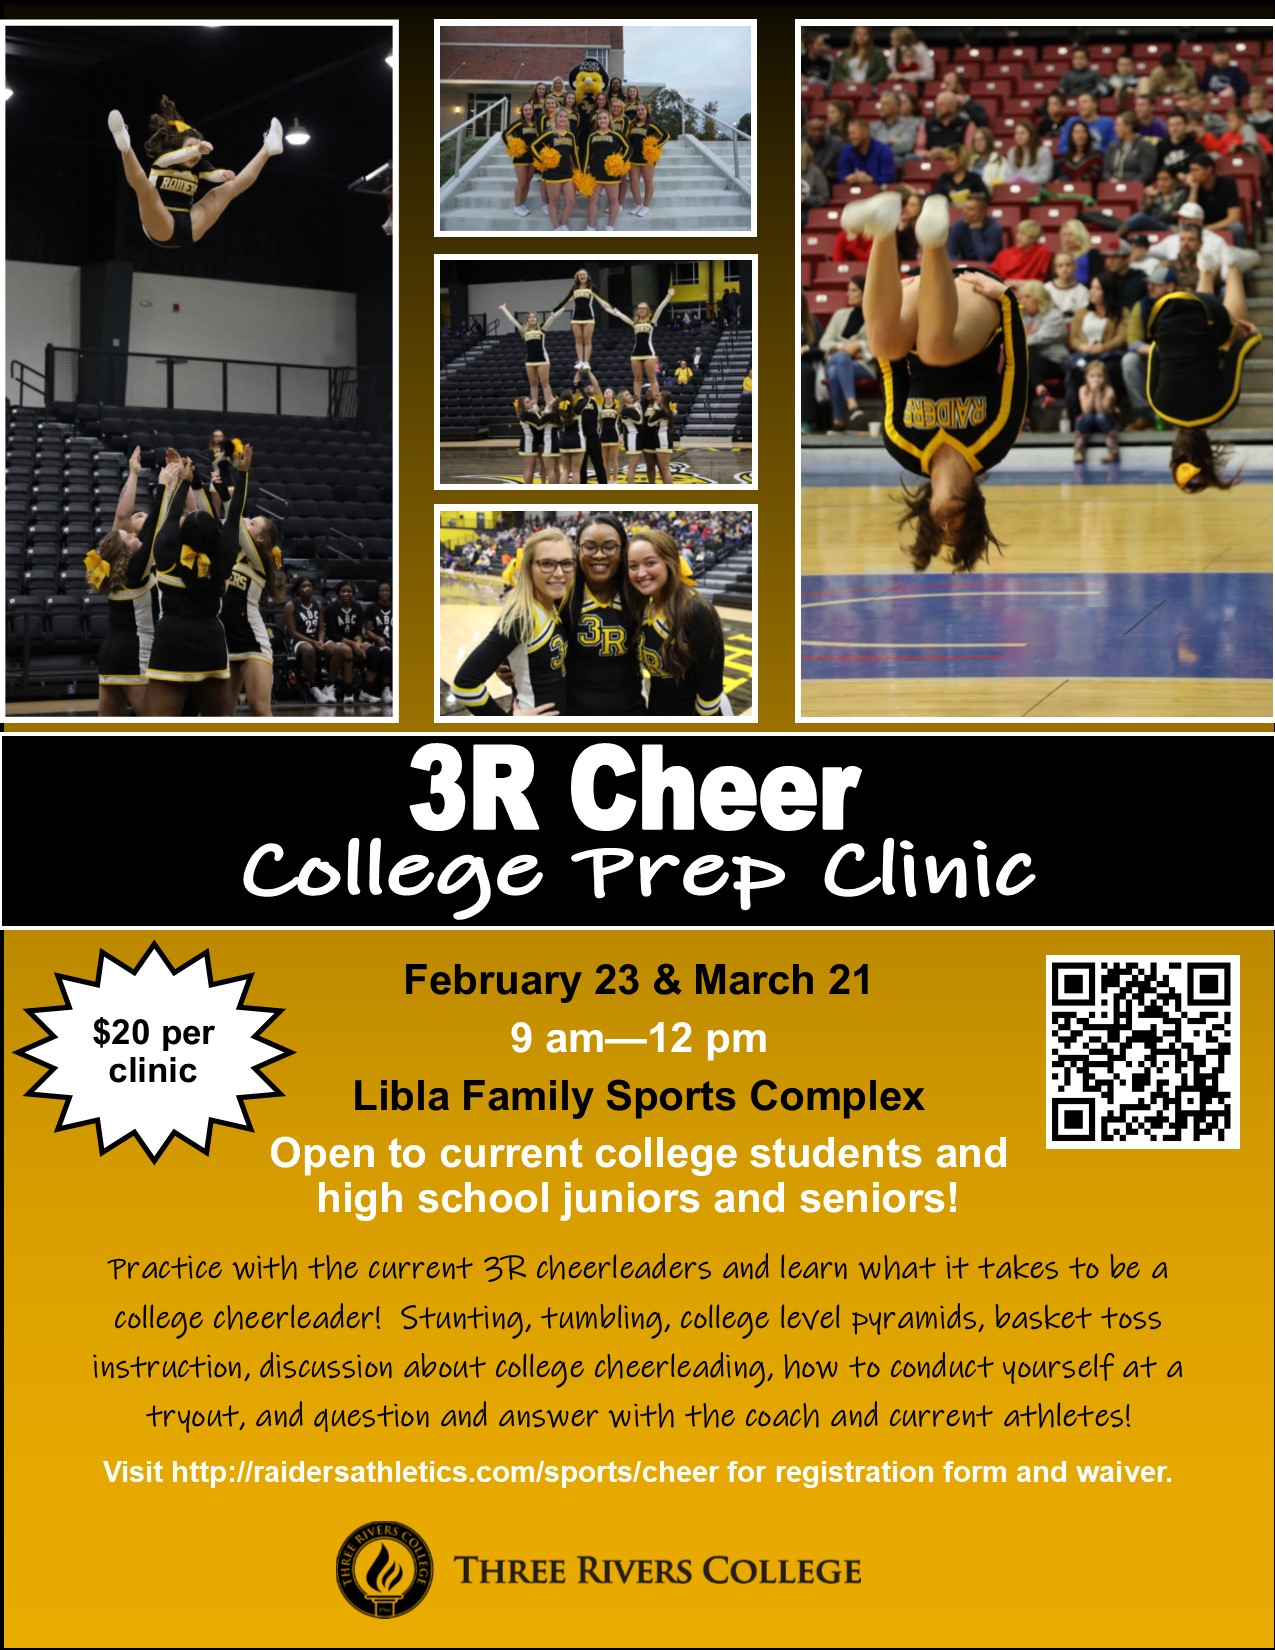 Cheer to hold College Prep Clinic